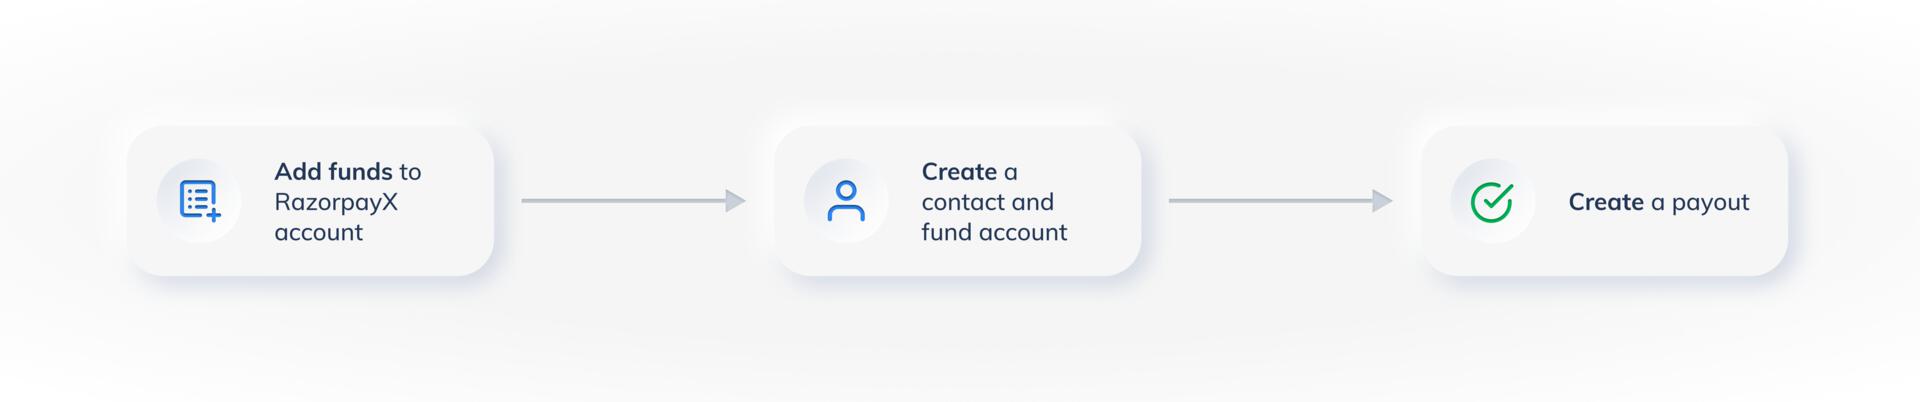 Create Payout by adding funds → create Contact and Fund Account → create Payout